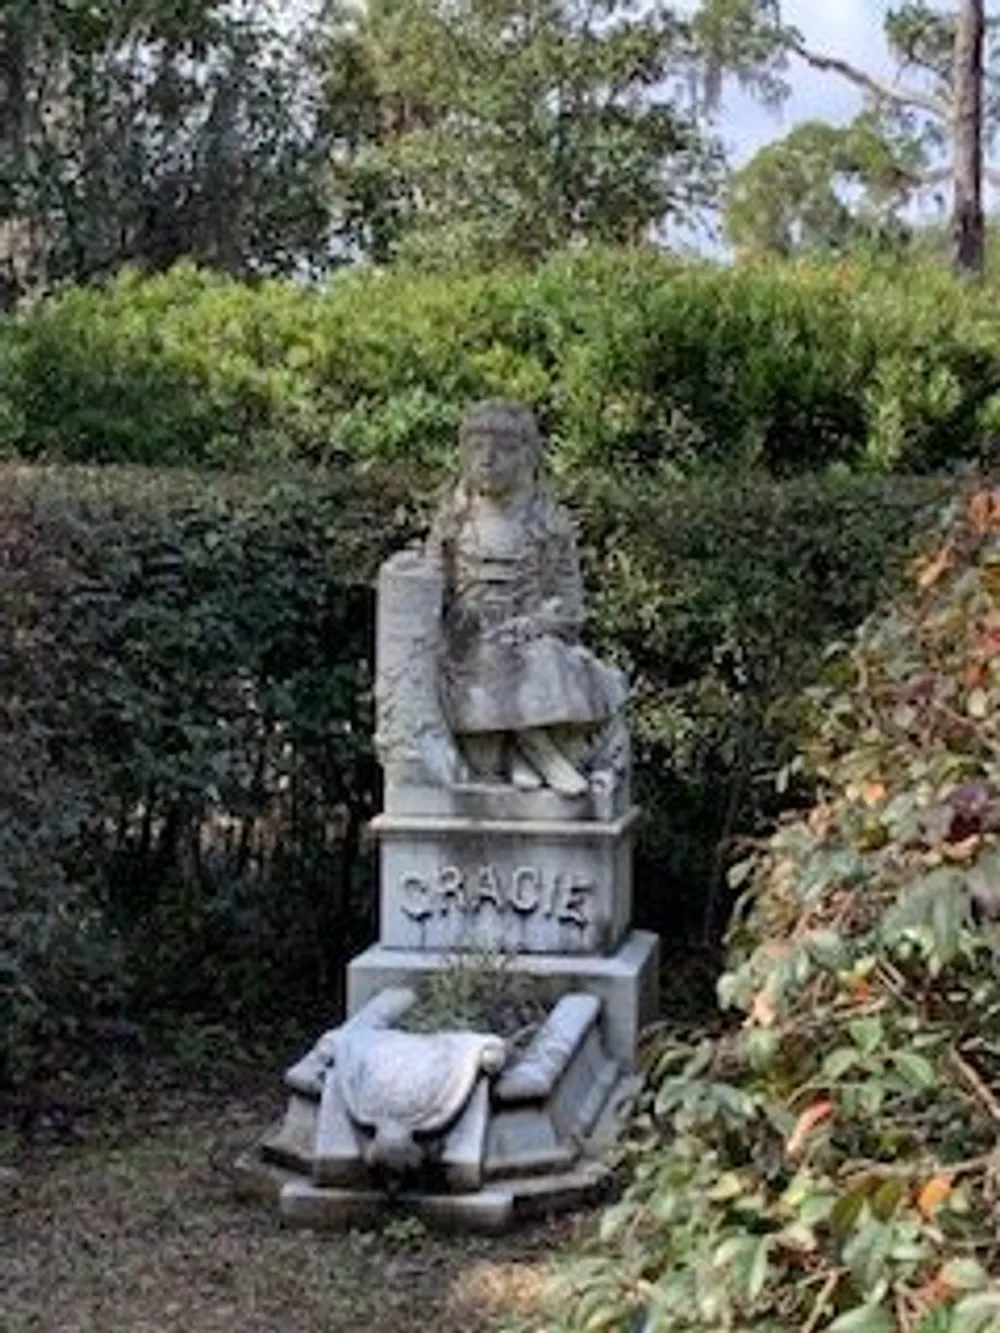 The image shows a weathered stone monument of a small dog sitting atop a pedestal with the name Gracie inscribed on it set within a peaceful green garden environment